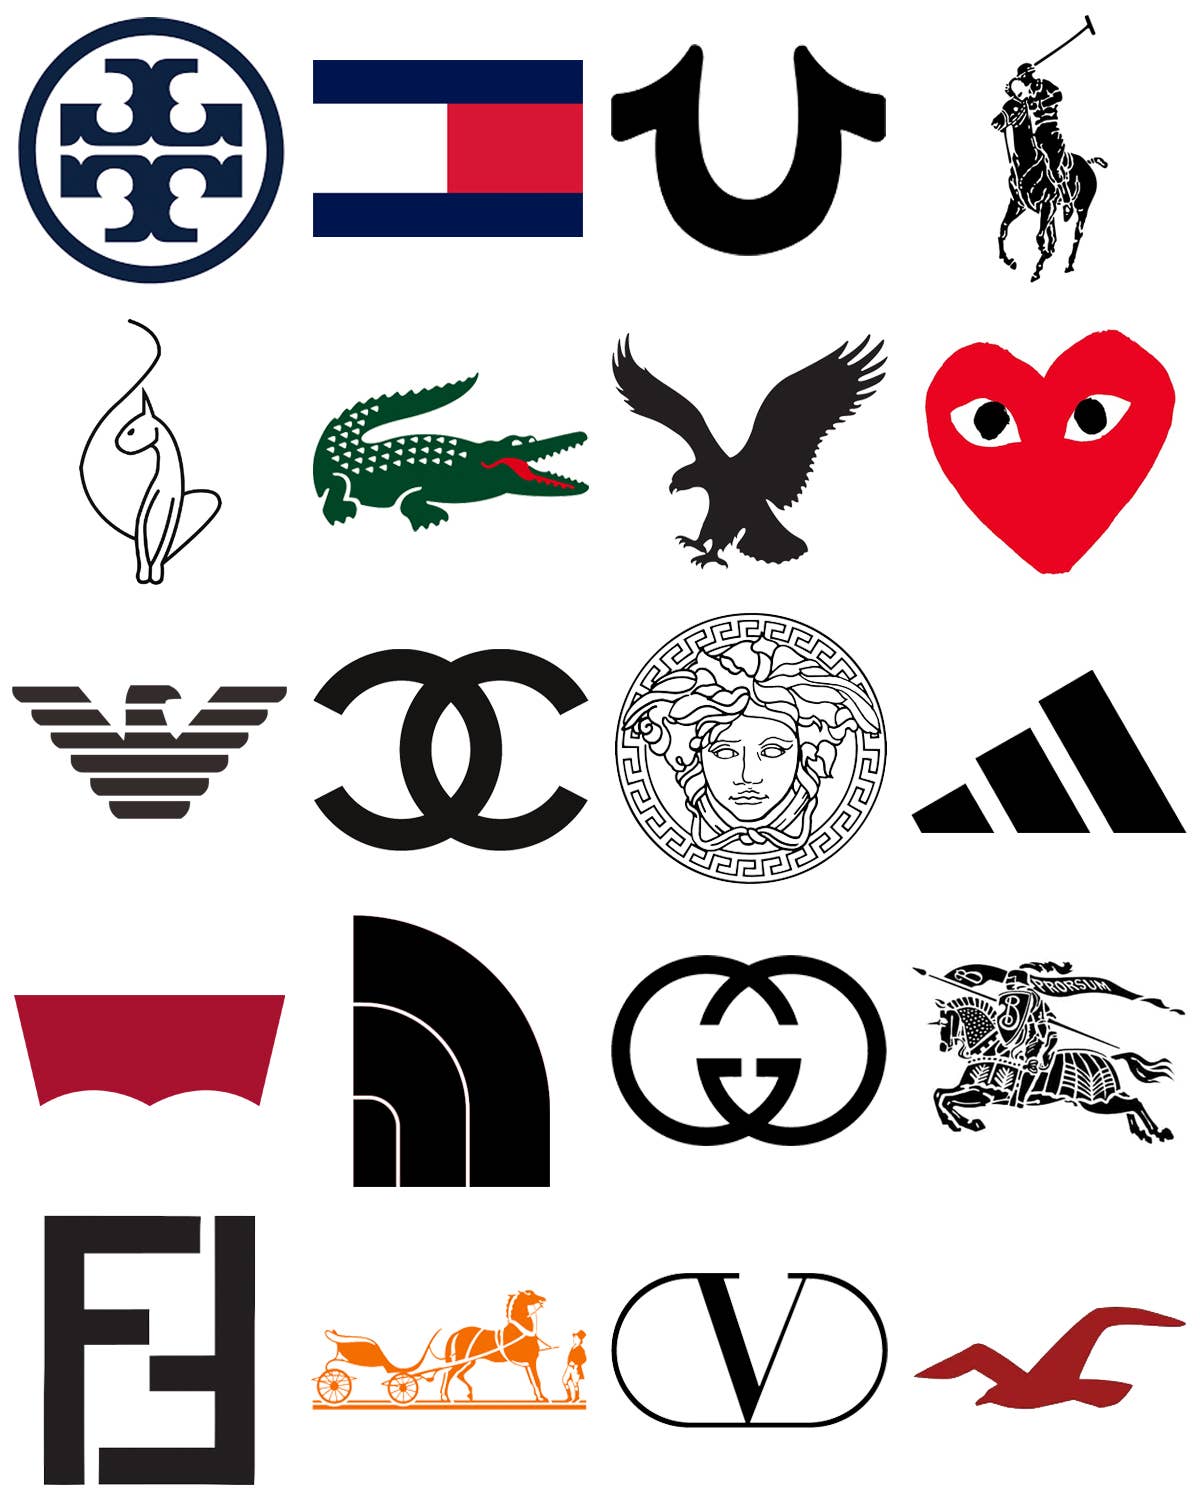 How Well Do You Know Logos?